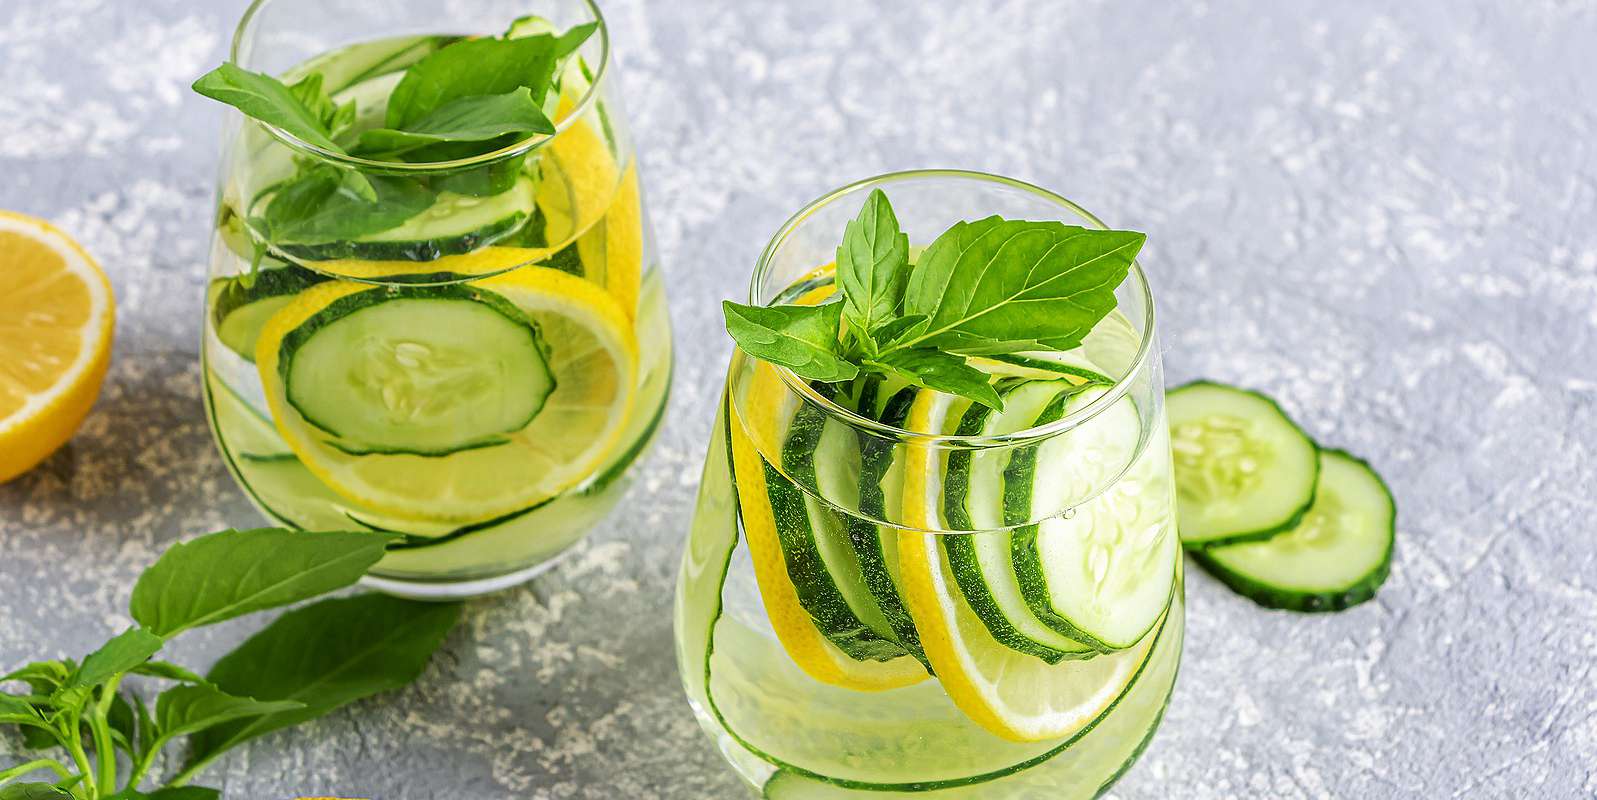 Cooling Cucumber Water with Lemon and Mint